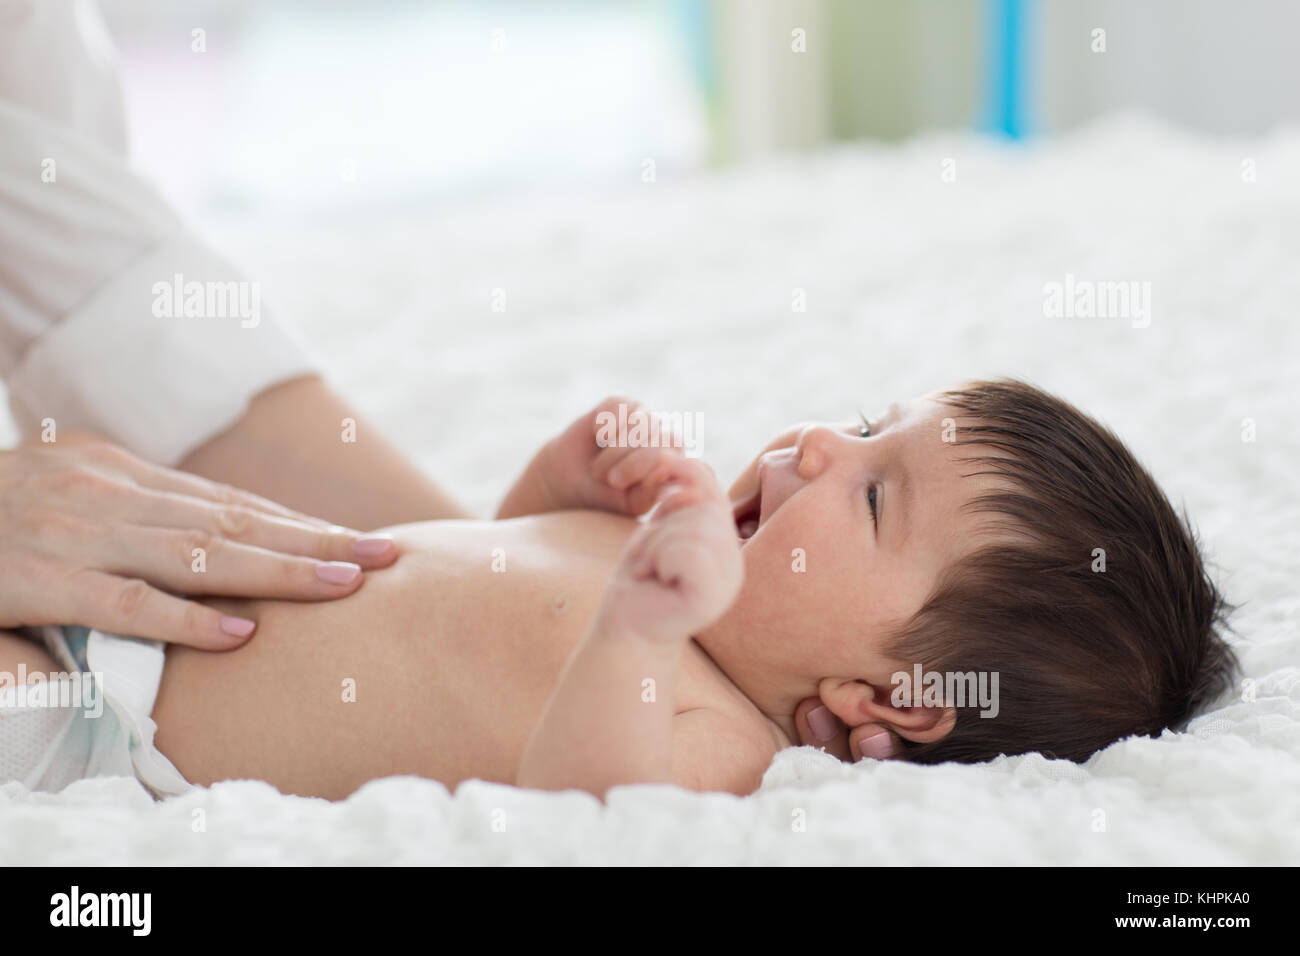 Masseur massaging the tummy of the baby Stock Photo